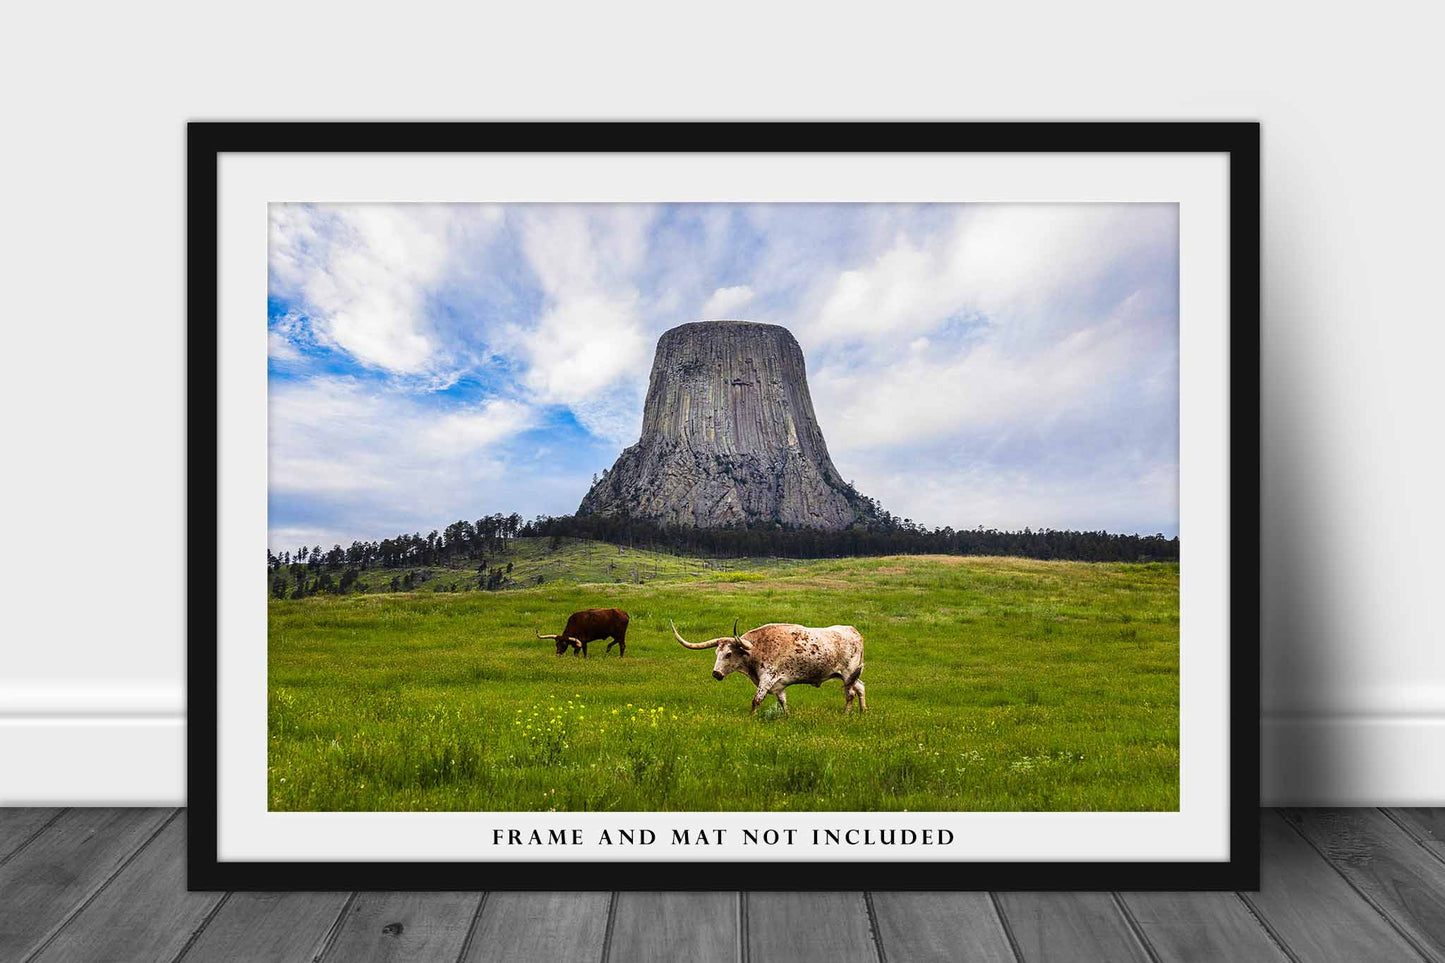 Western Photo Print | Longhorns at Devils Tower Picture | Wyoming Wall Art | Landscape Photography | Black Hills Decor